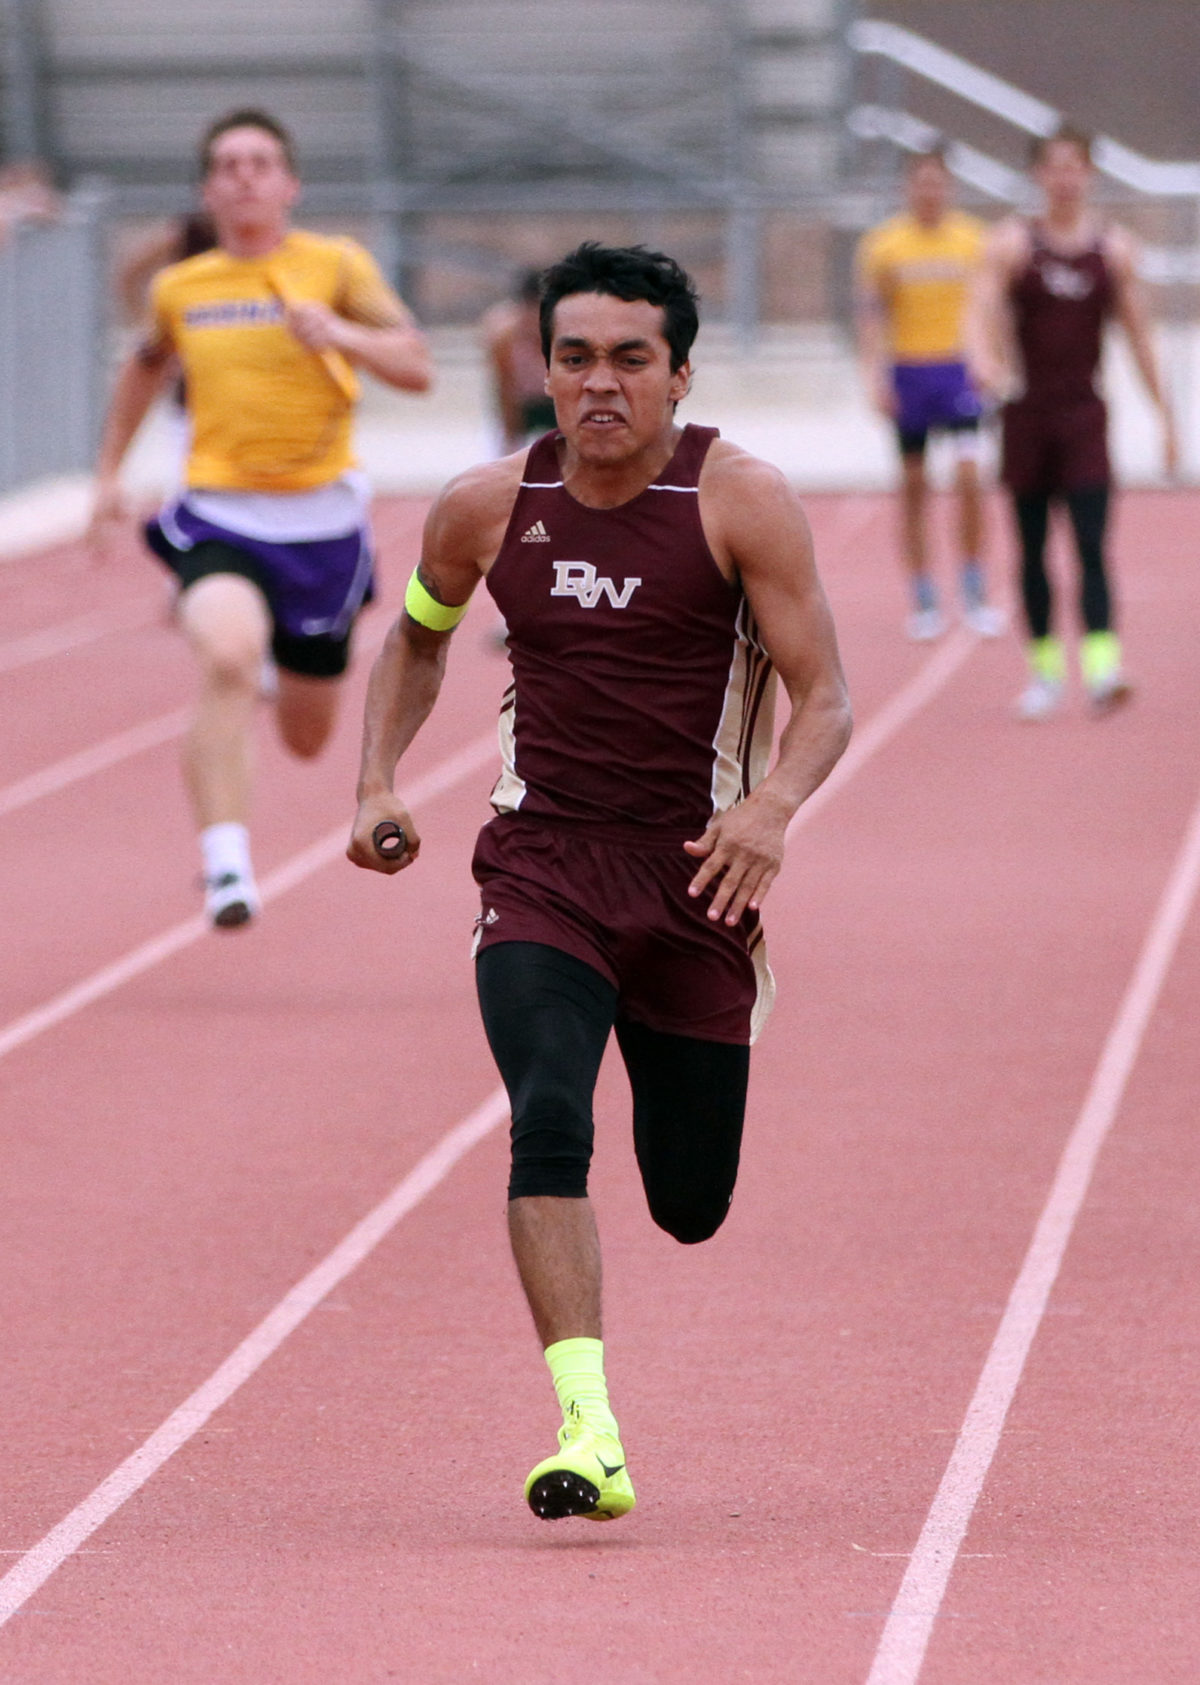 Warhorse and Arabian track prepare for District meet in Crystal City